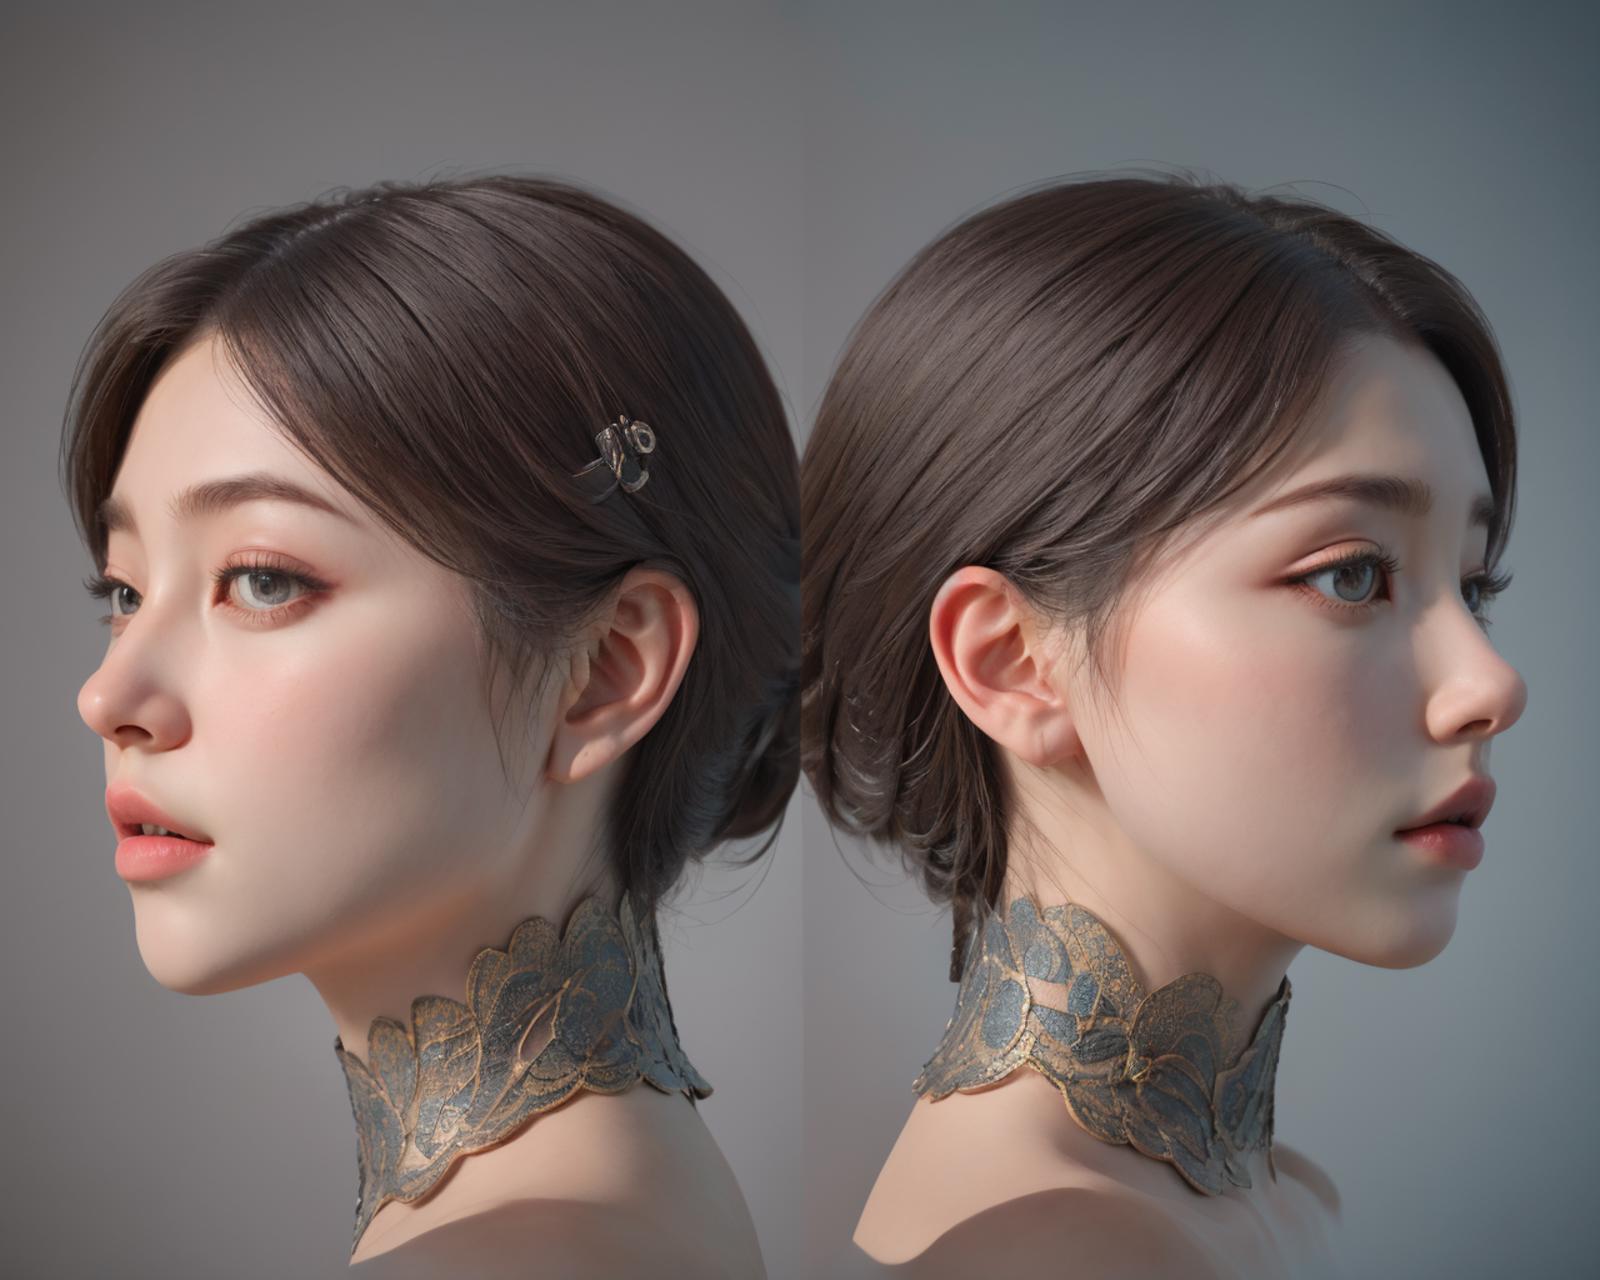 Reference Sheet for Head | Tool LoRA image by eznorb